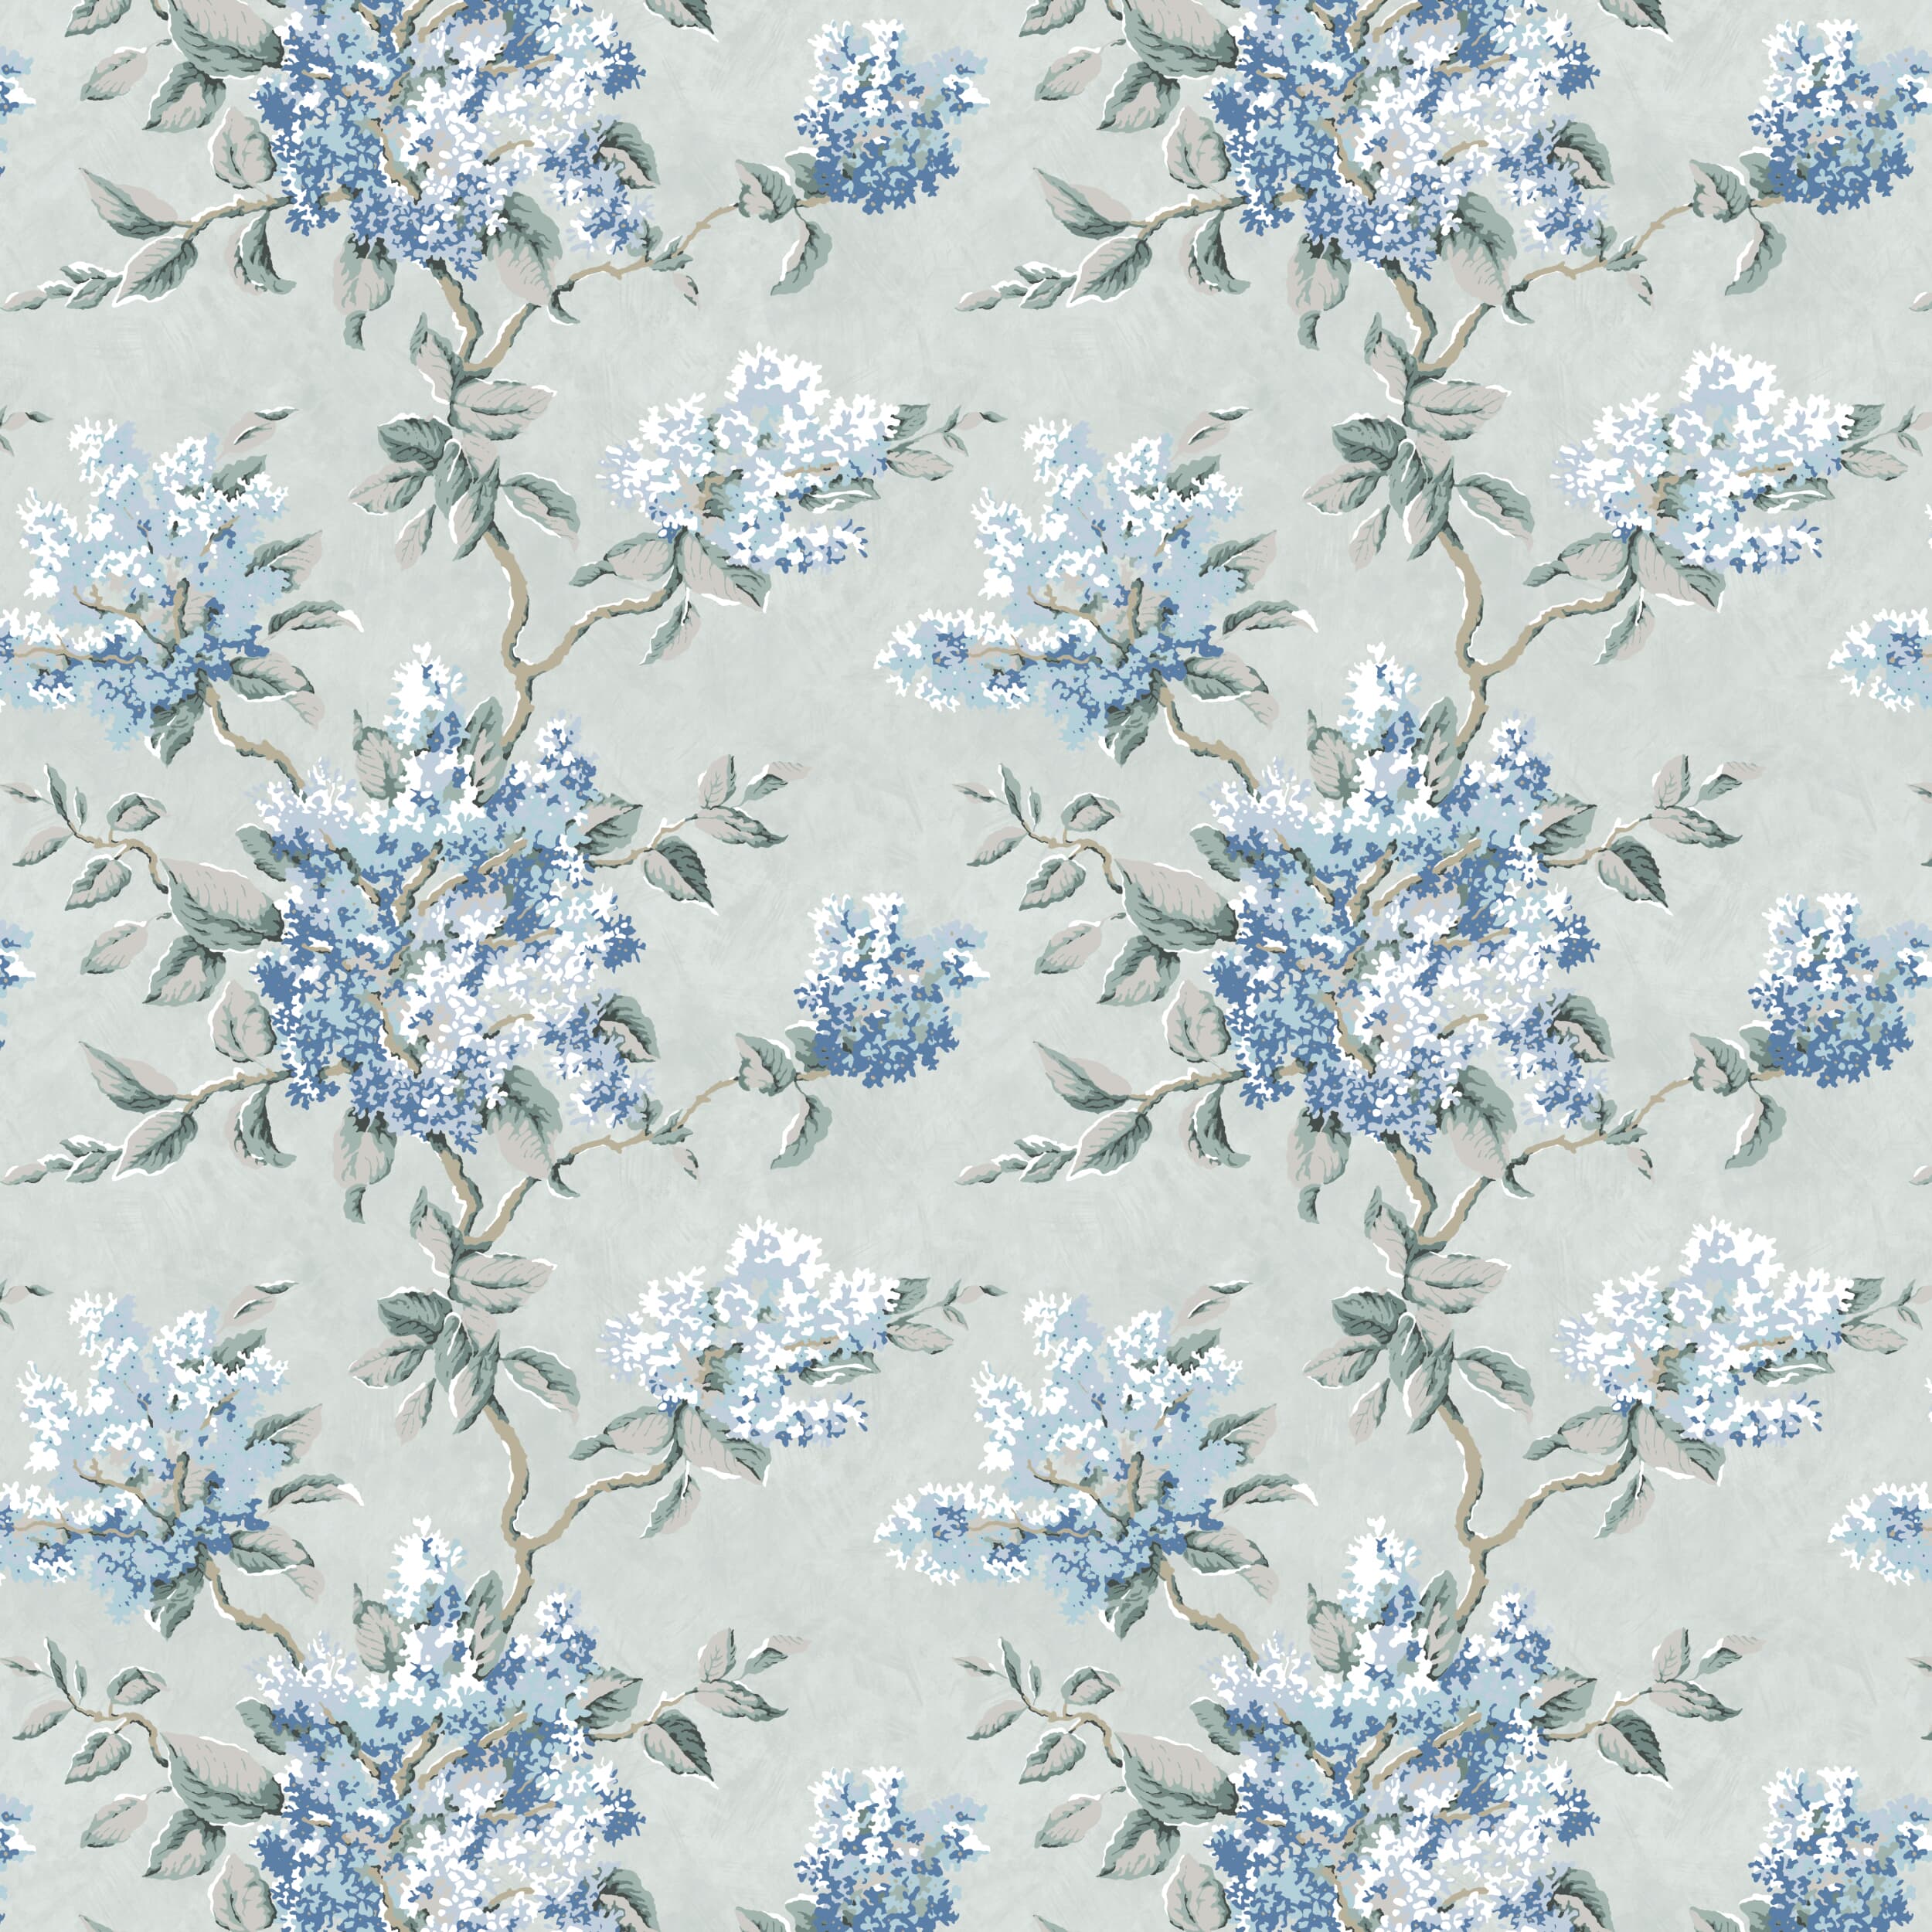 7829-4 Lilacs Fern by Stout Fabric